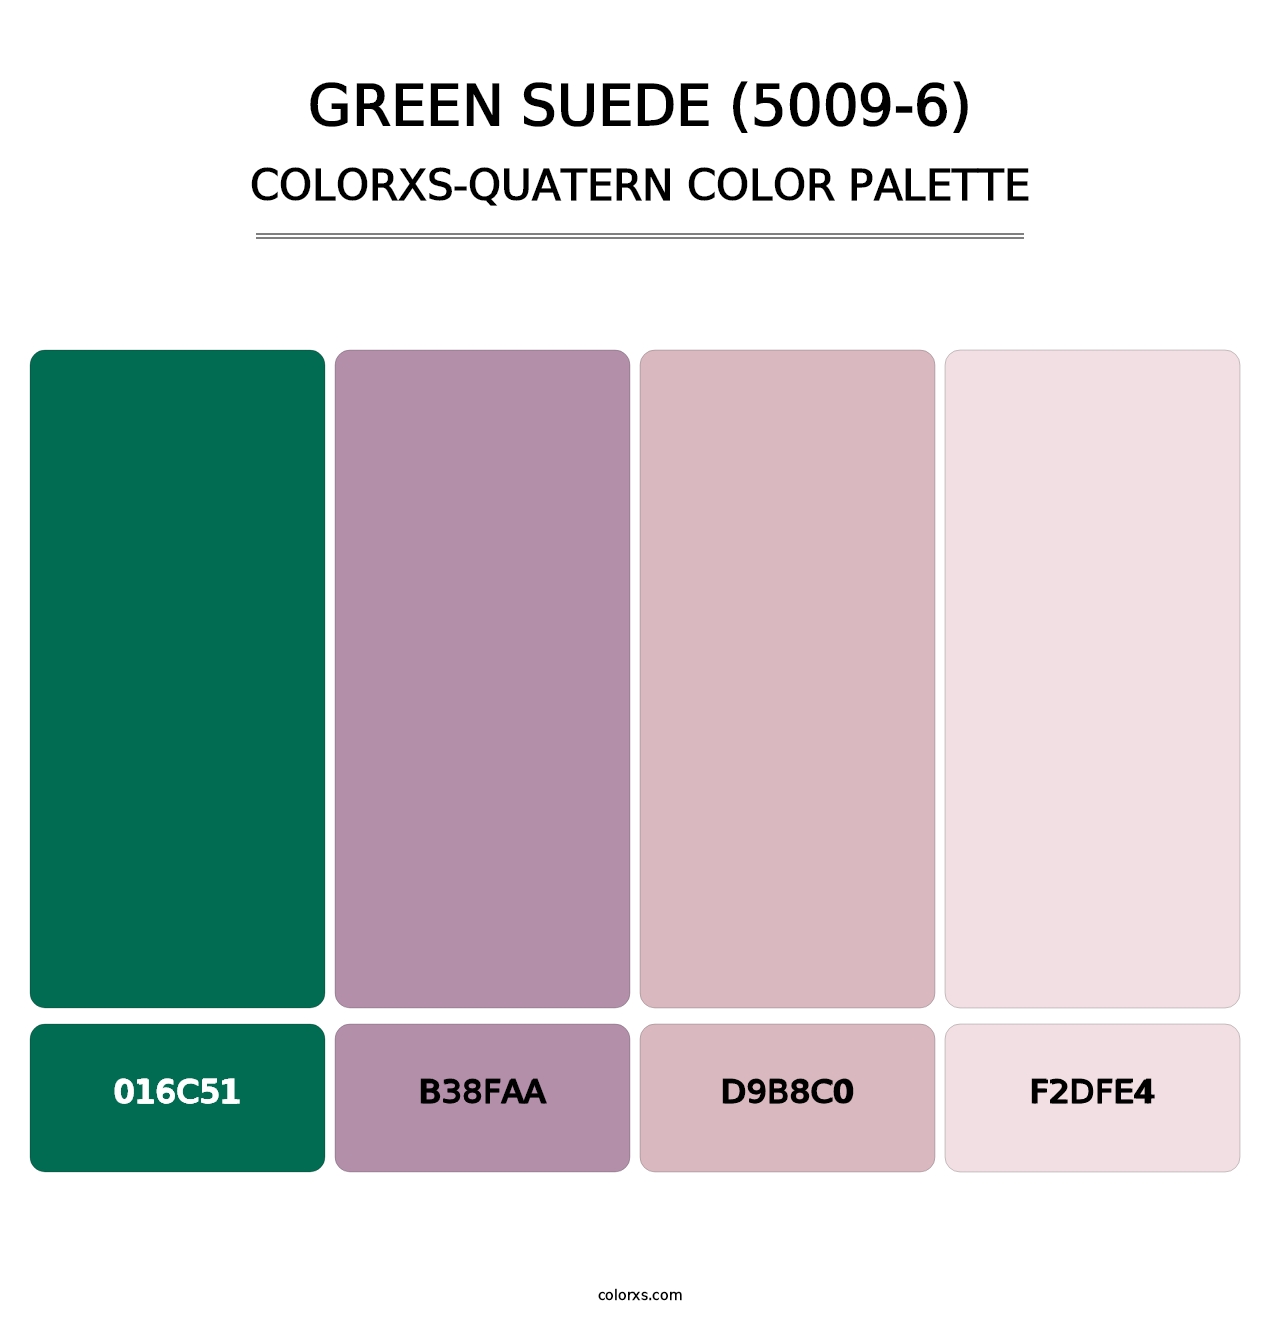 Green Suede (5009-6) - Colorxs Quatern Palette